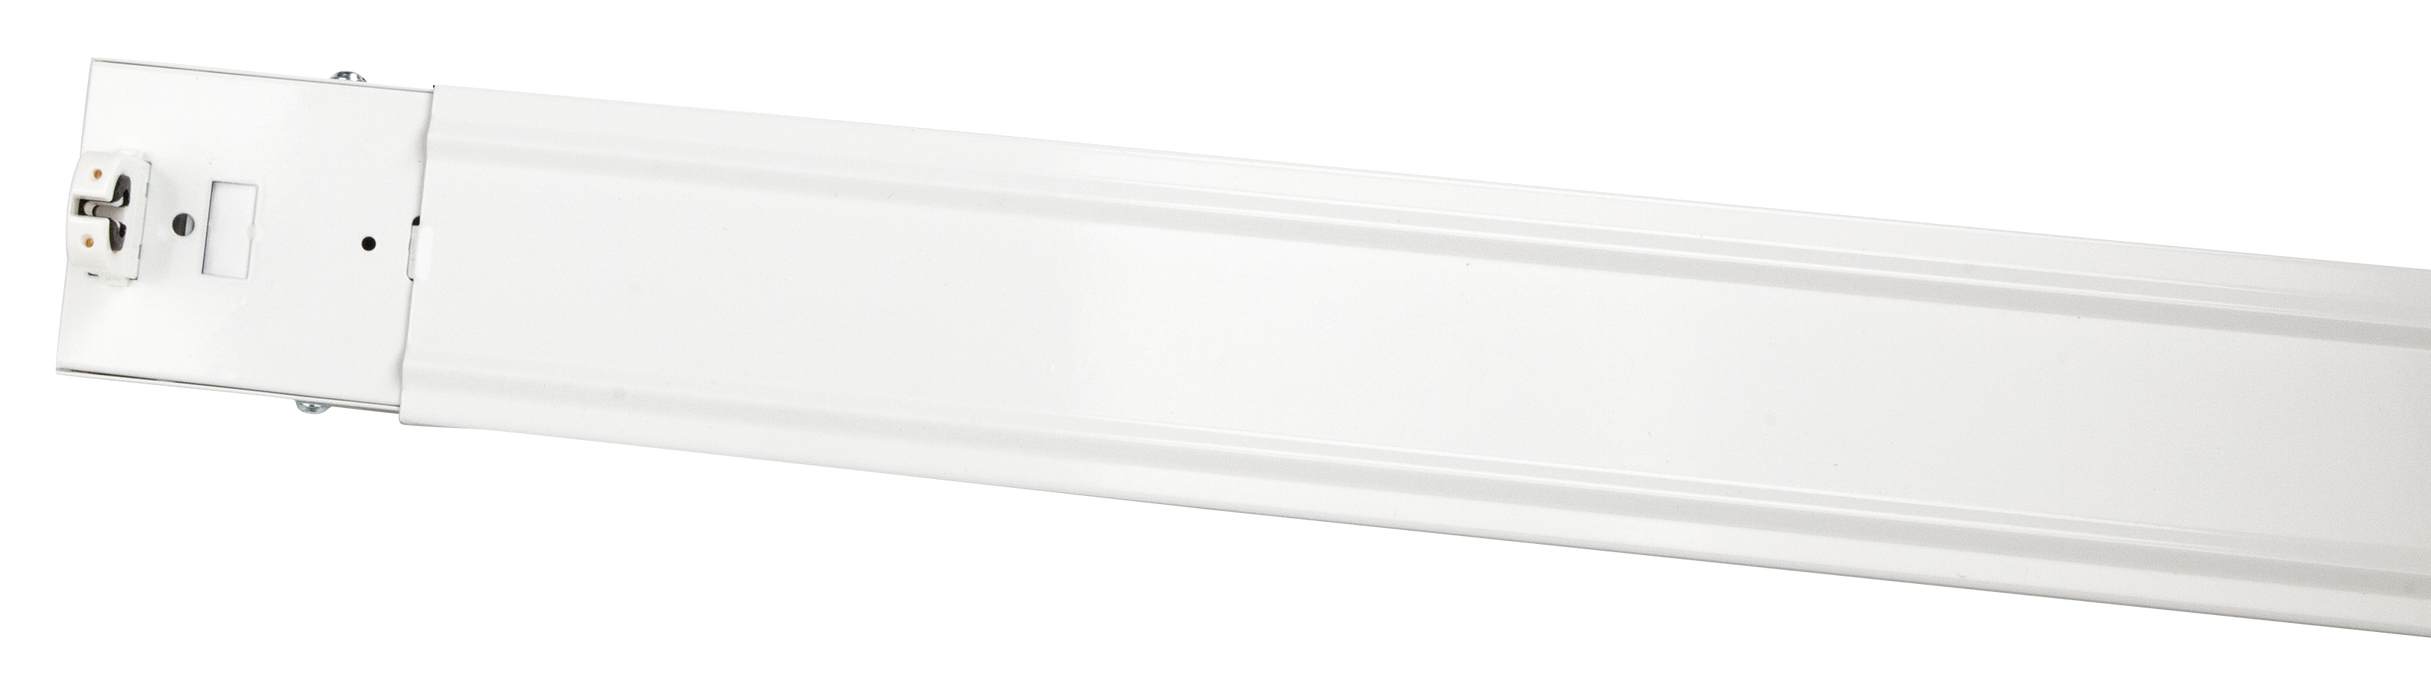 TCP 4 Foot 2-Lamp Double End T8 Bypass Ready General Purpose Strip Fixture With Leviton PIR Occupancy Sensor (GPS4WA2LT8B2LS1)